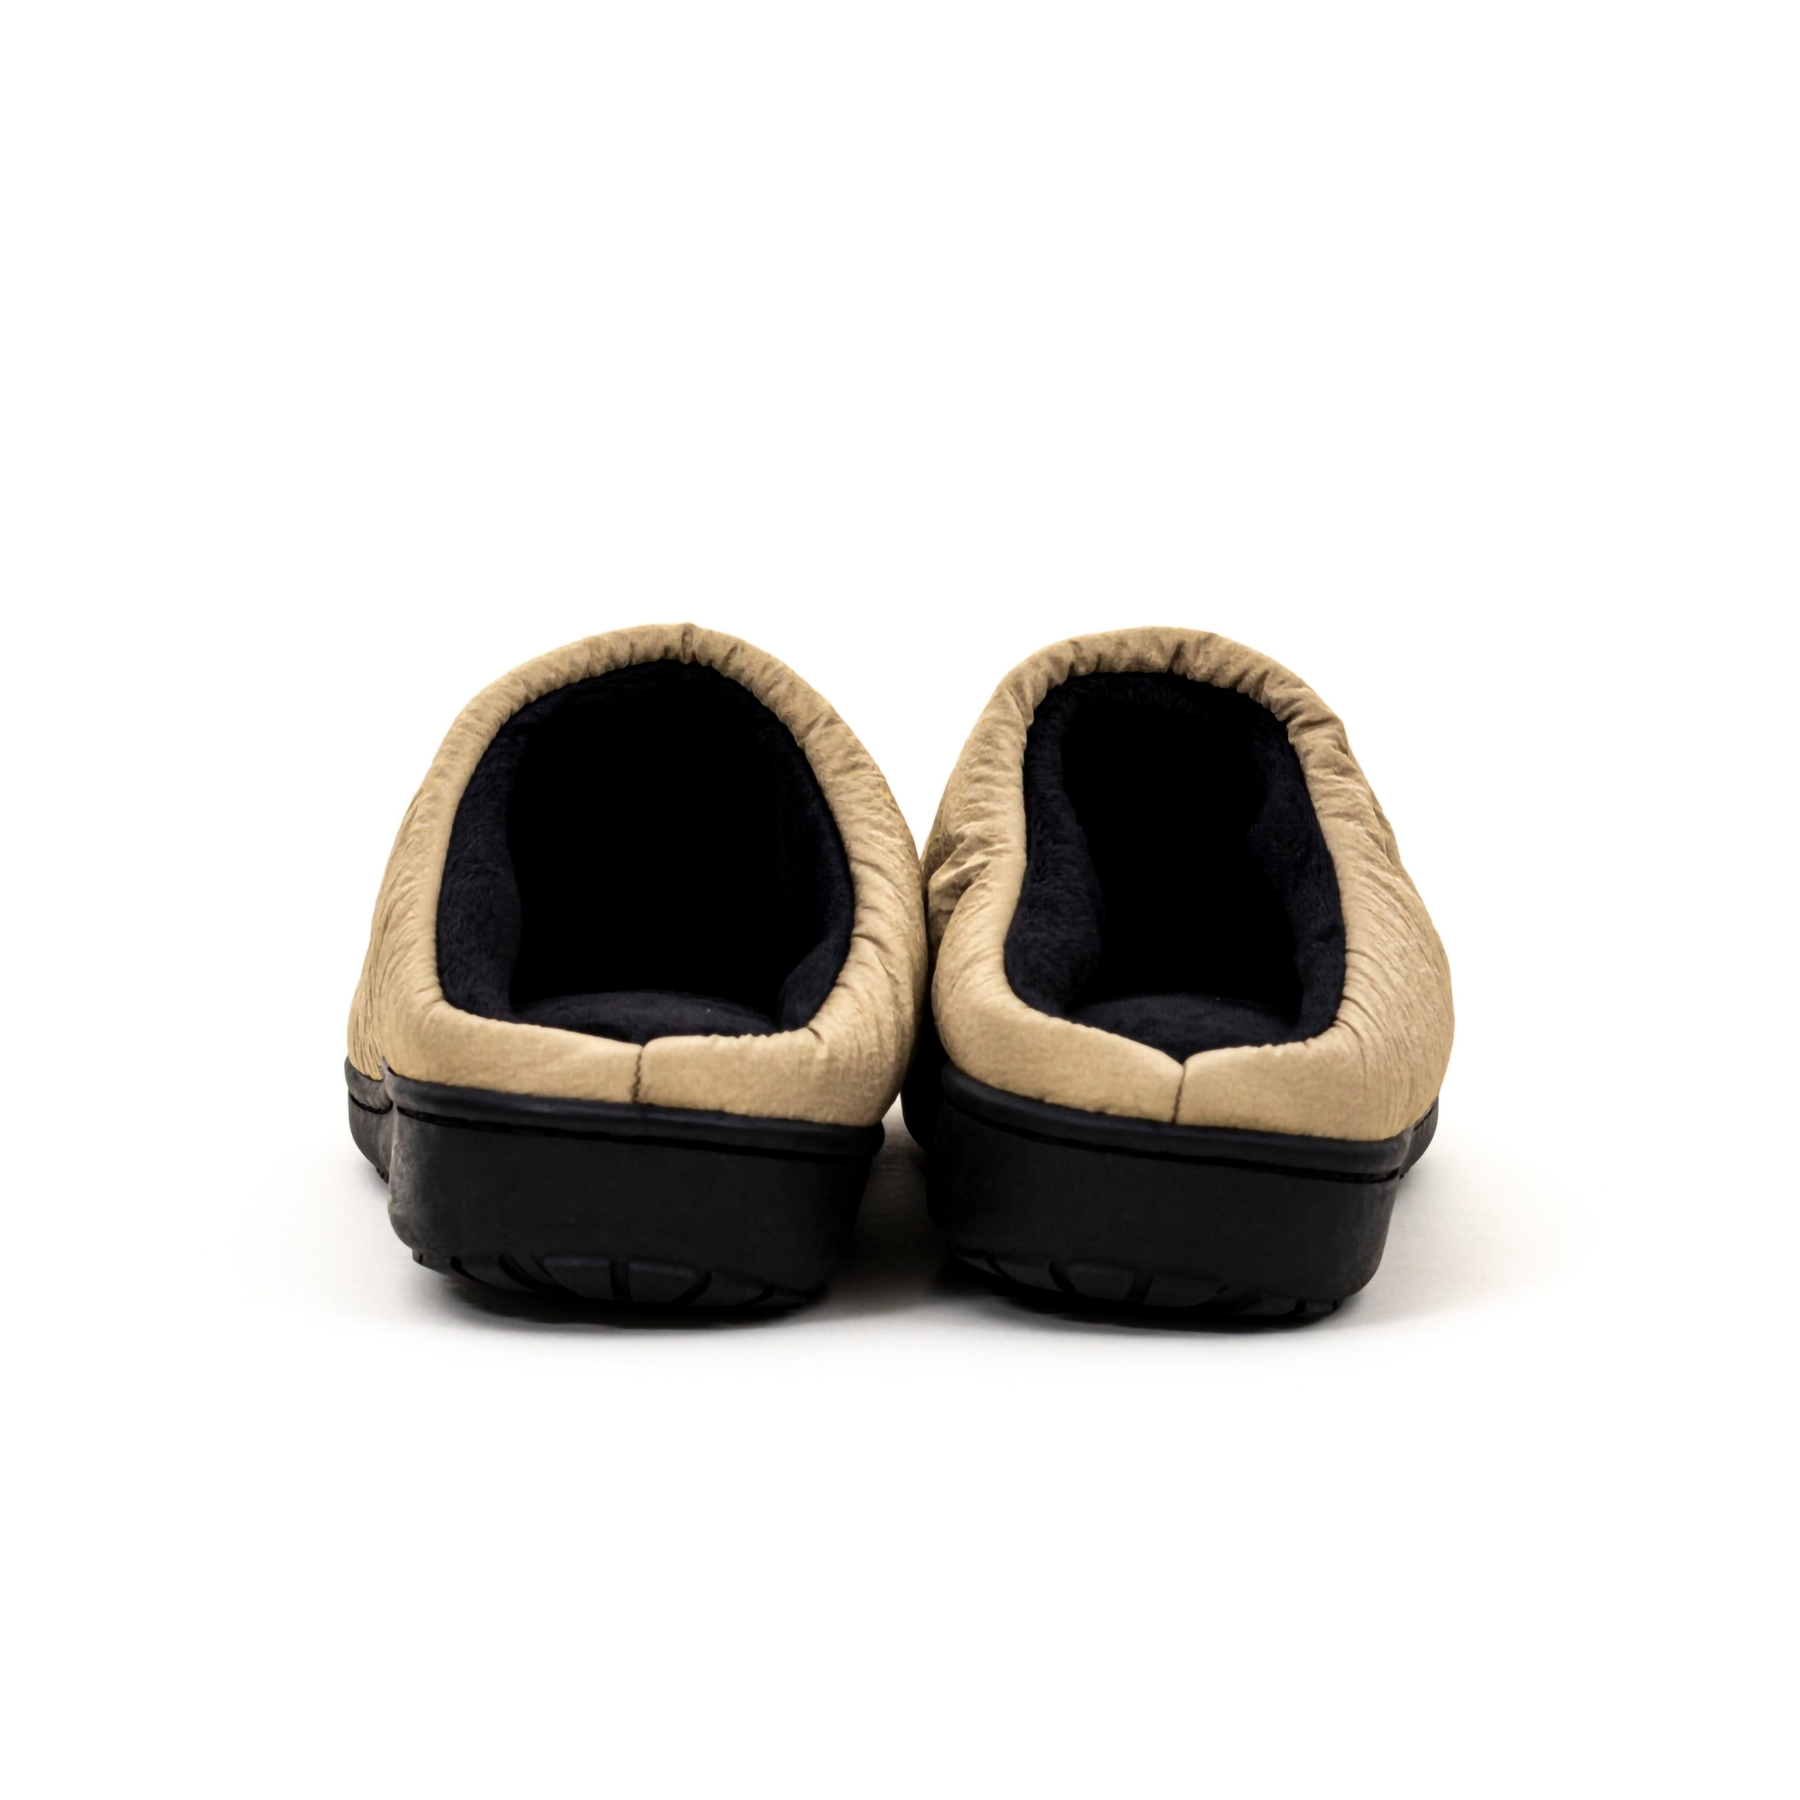 SUBU, Fall & Winter Slippers Beige, Size, 1, Slippers,